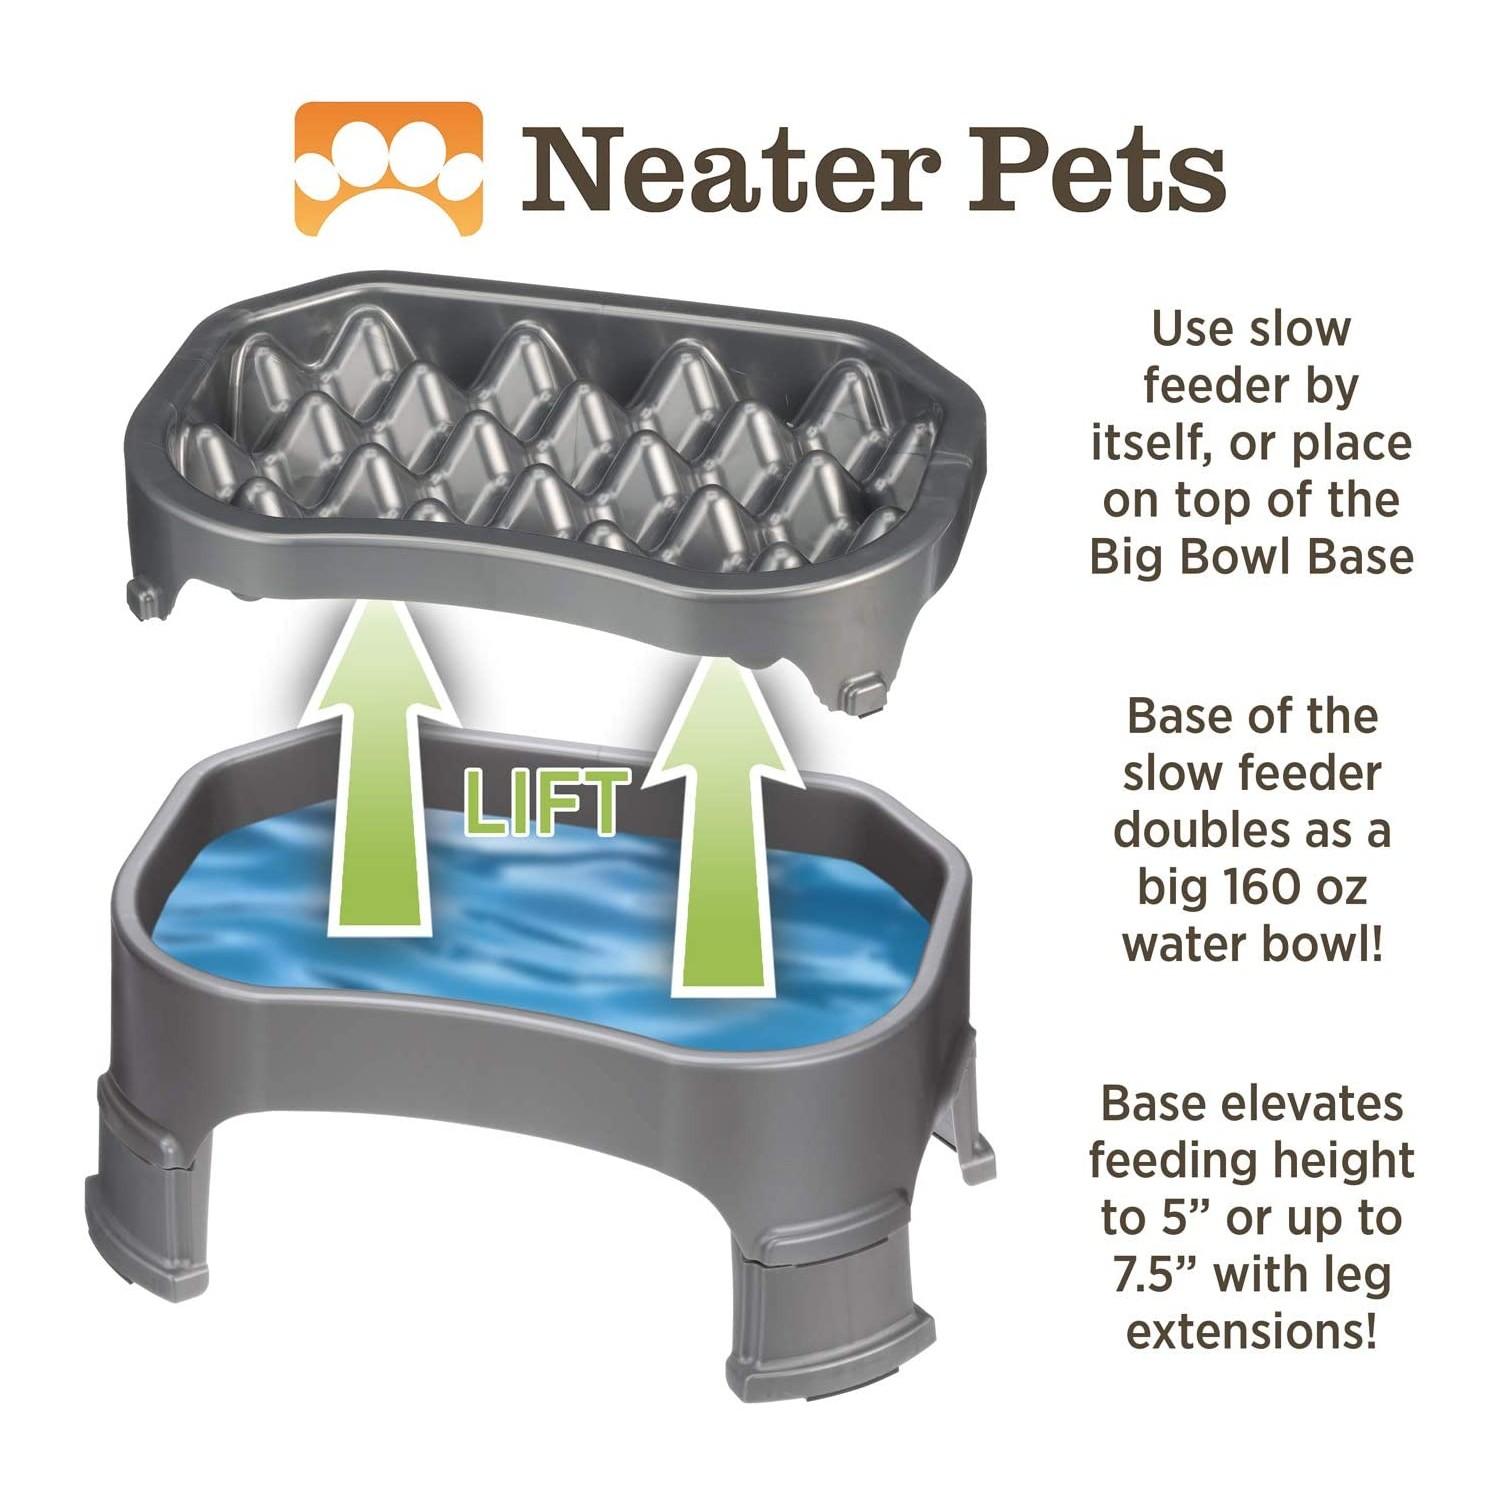 https://images.baxterboo.com/global/images/products/large/neater-feeder-elevated-slow-feed-dog-bowl-gunmetal-gray-7179.jpg